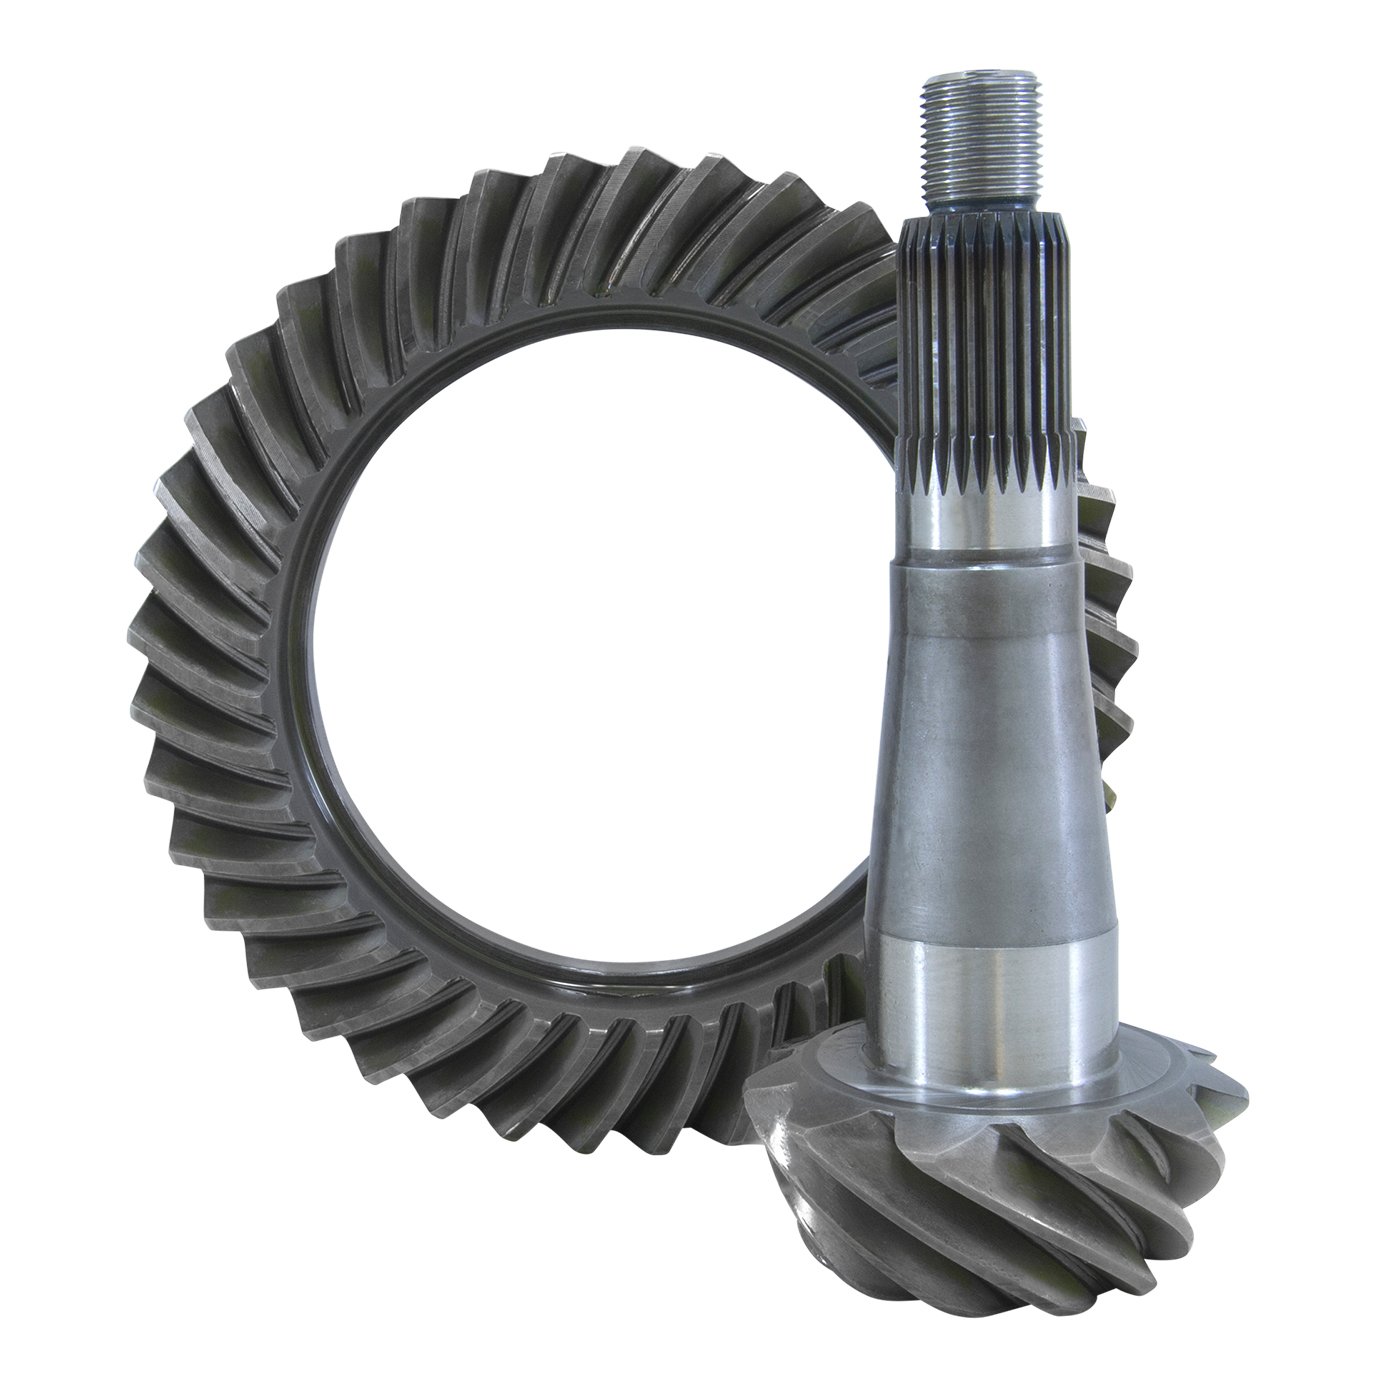 USA Standard ZG C8.89-390 Ring & Pinion Gear Set, For Chrysler 8.75 in. W/ 89 Housing, 3.90 Ratio